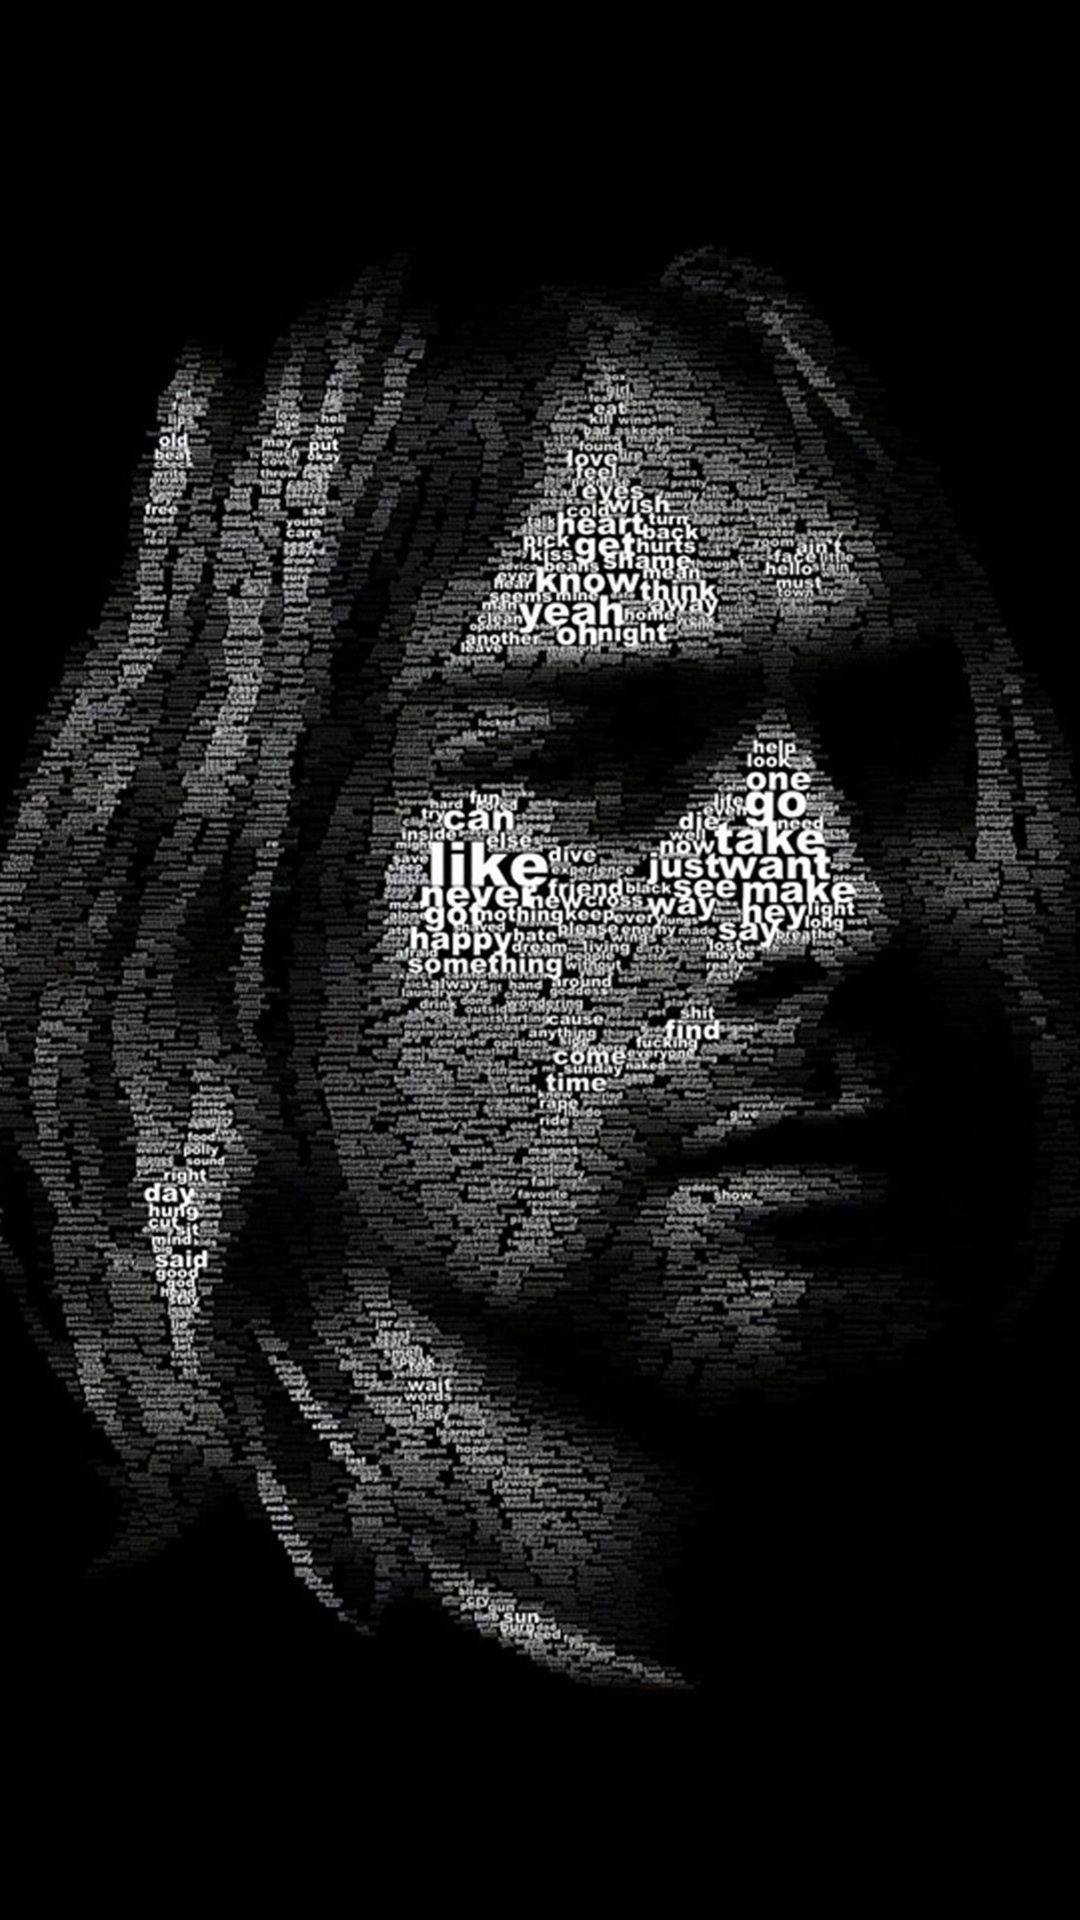 Kurt Cobain illustration htc one wallpaper, free and easy